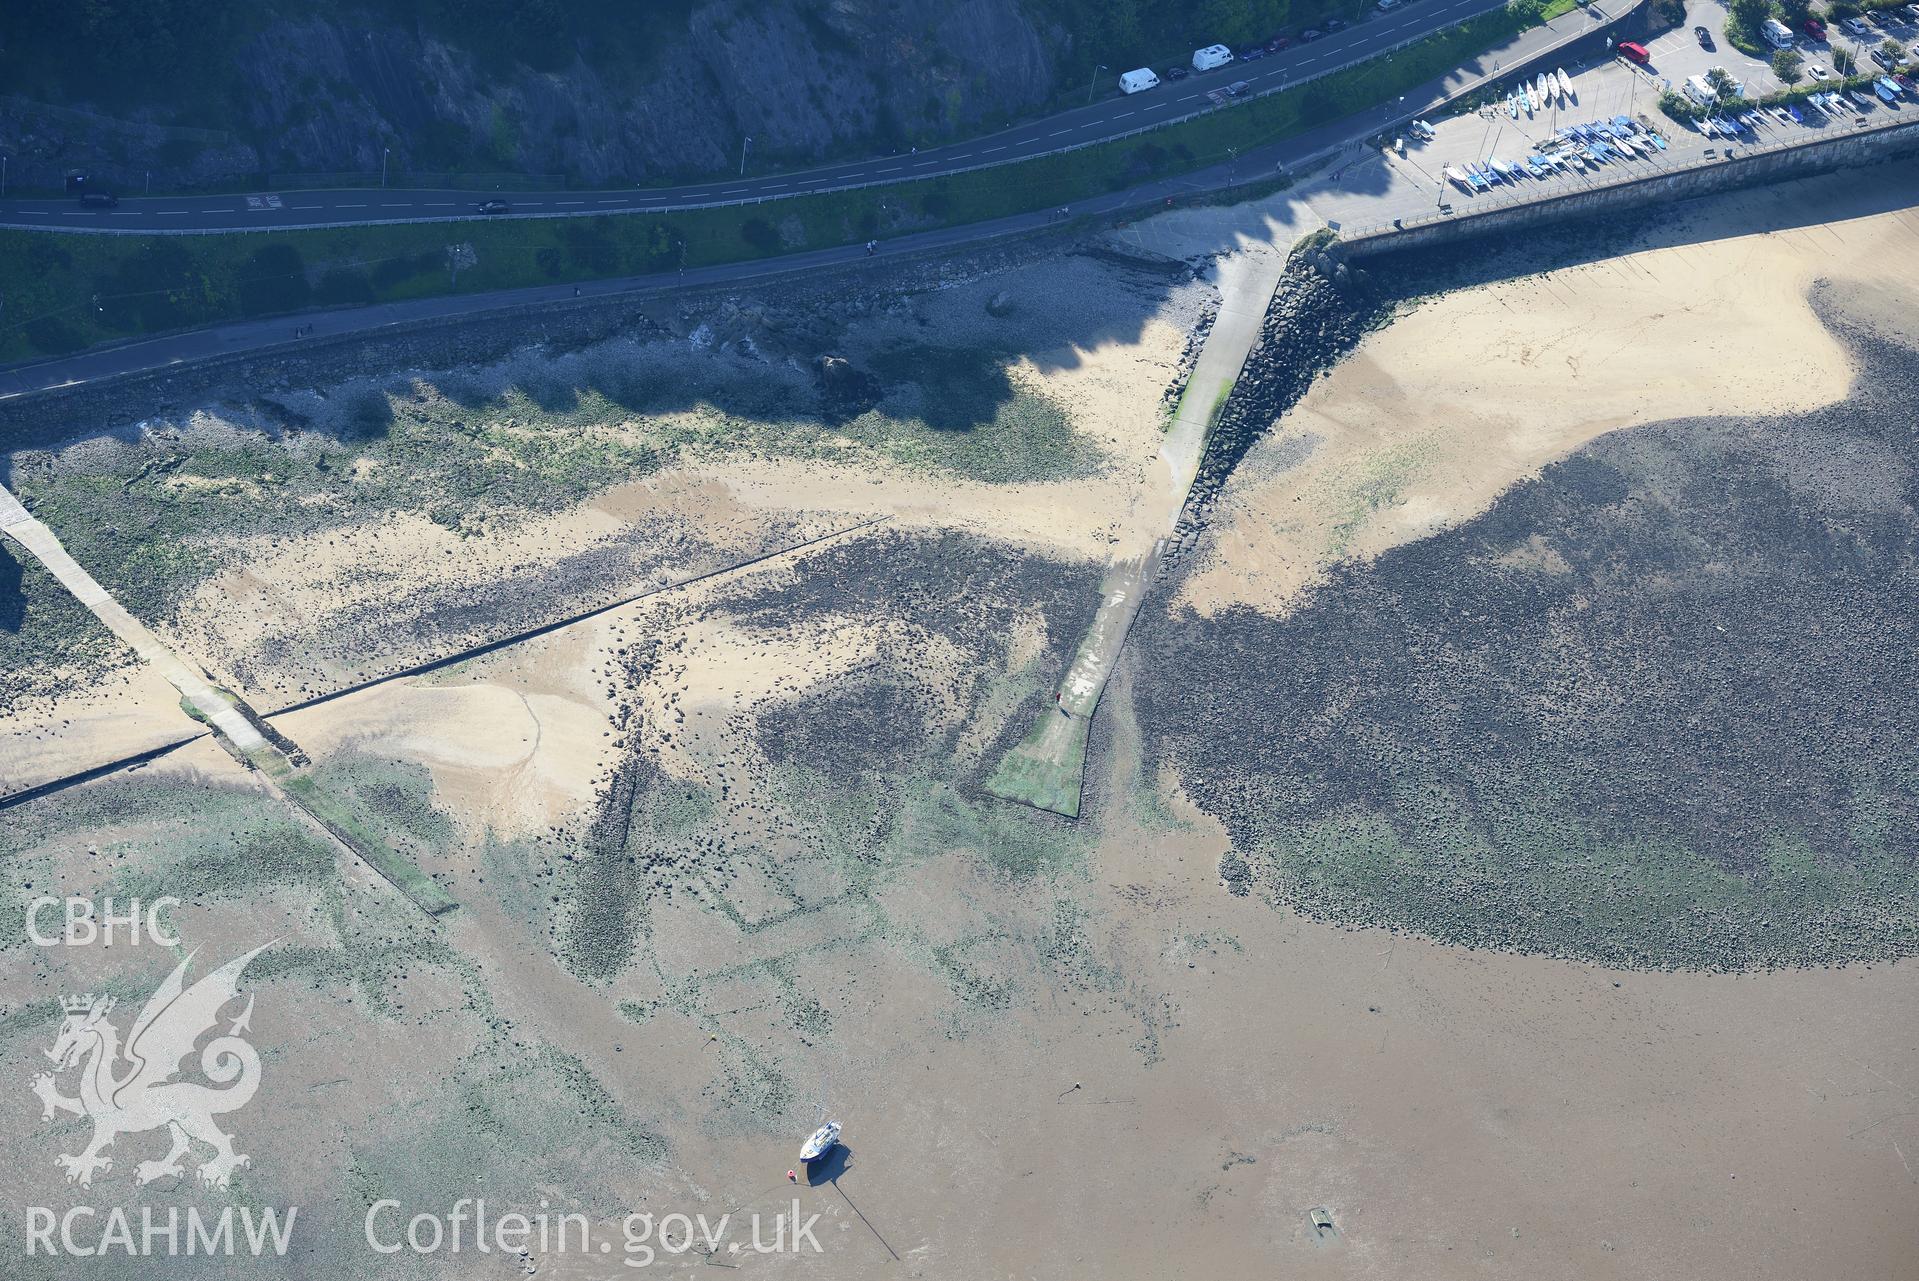 Intertidal structures or Oyster Beds at Limeslade Bay, Gower. Oblique aerial photograph taken during the Royal Commission's programme of archaeological aerial reconnaissance by Toby Driver on 30th September 2015.